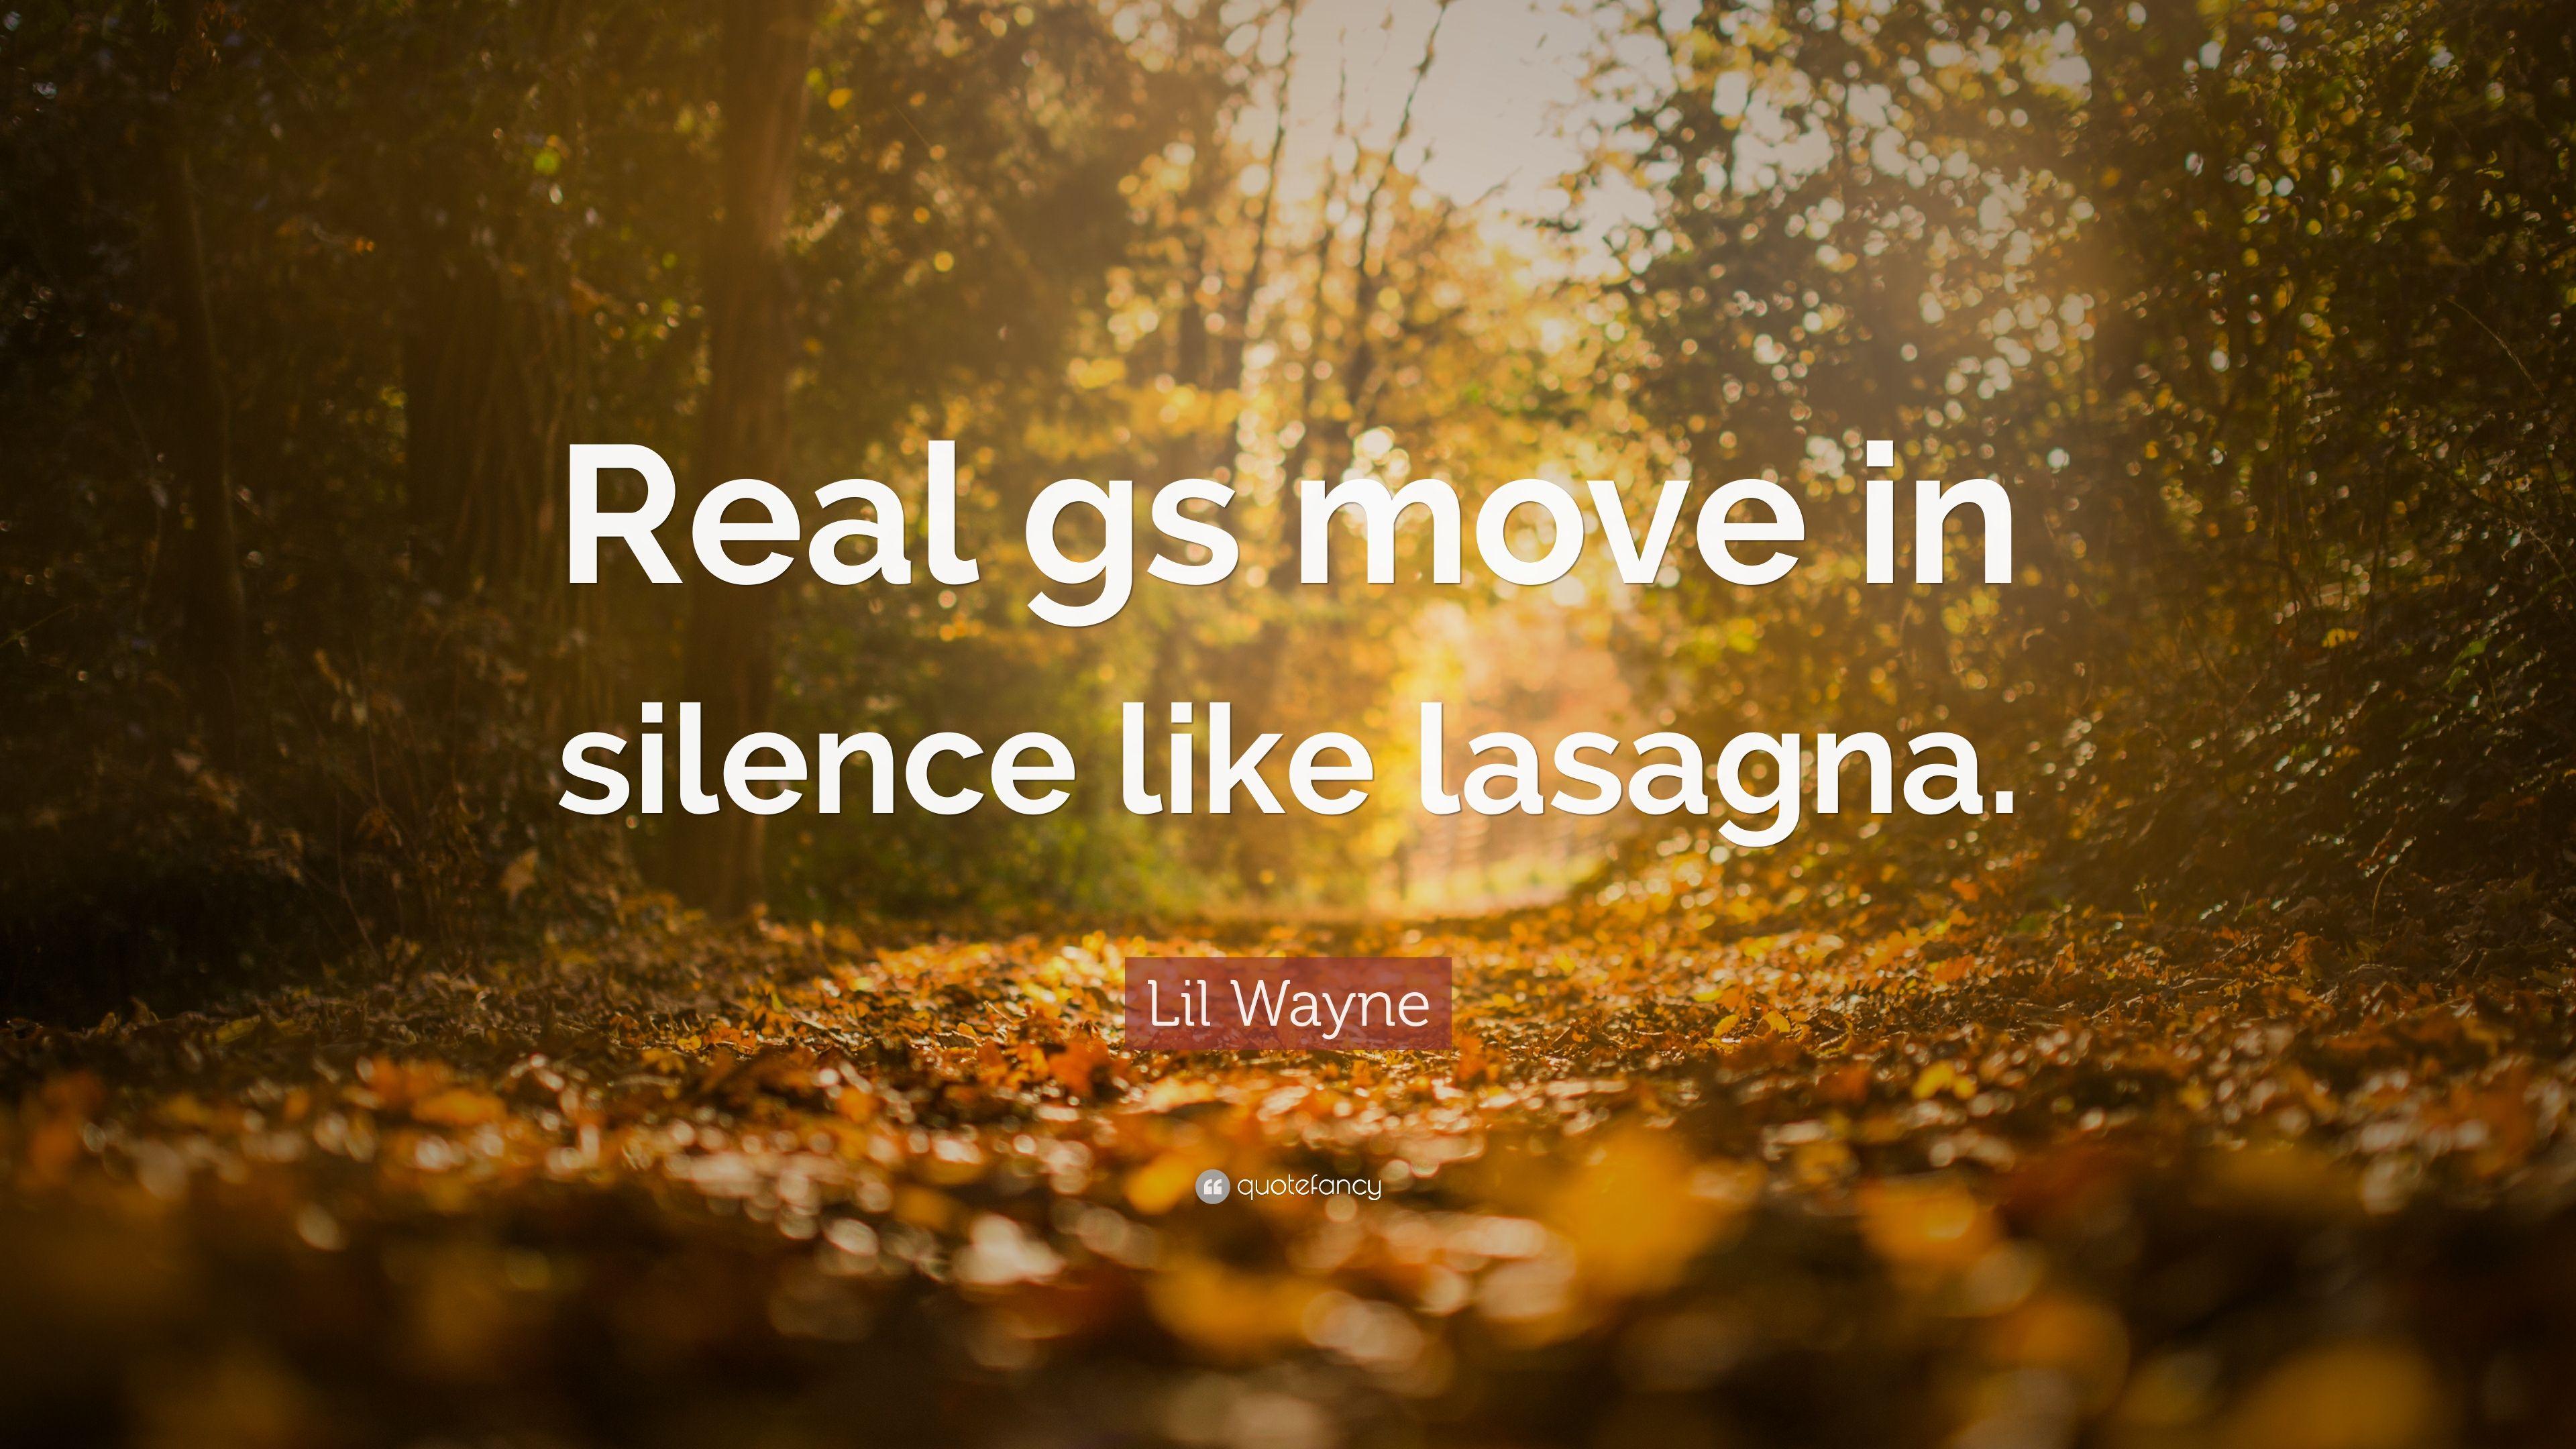 Lil Wayne Quote: “Real gs move in silence like lasagna.” 12